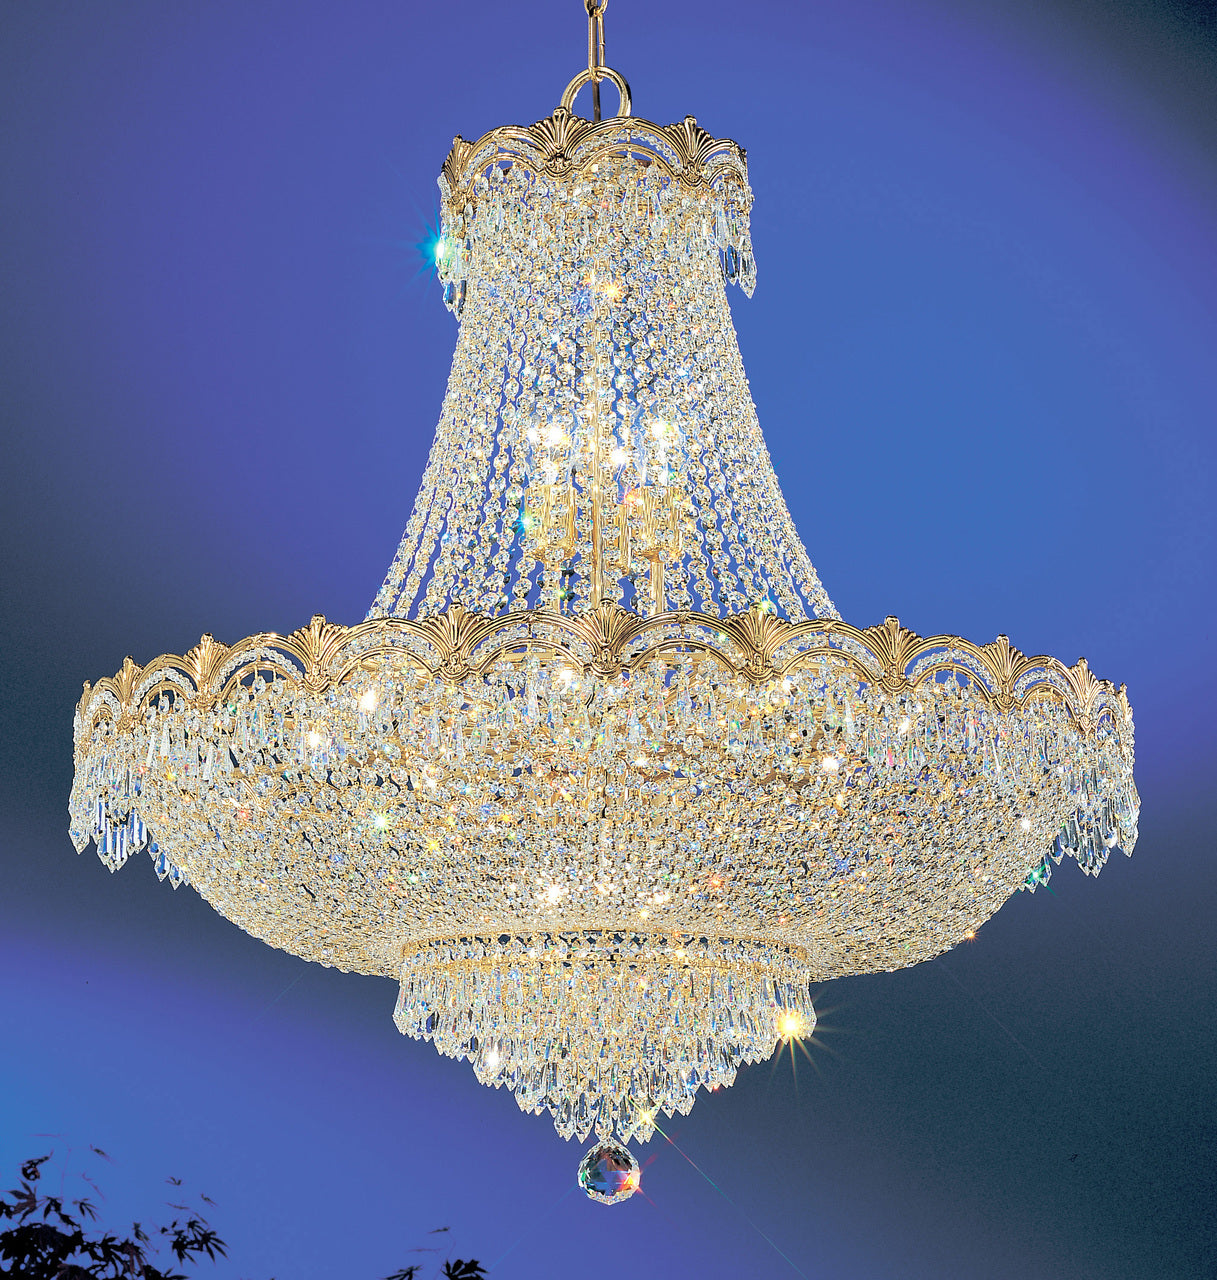 Classic Lighting 1858 G CP Regency II Crystal Chandelier in 24k Gold (Imported from Spain)